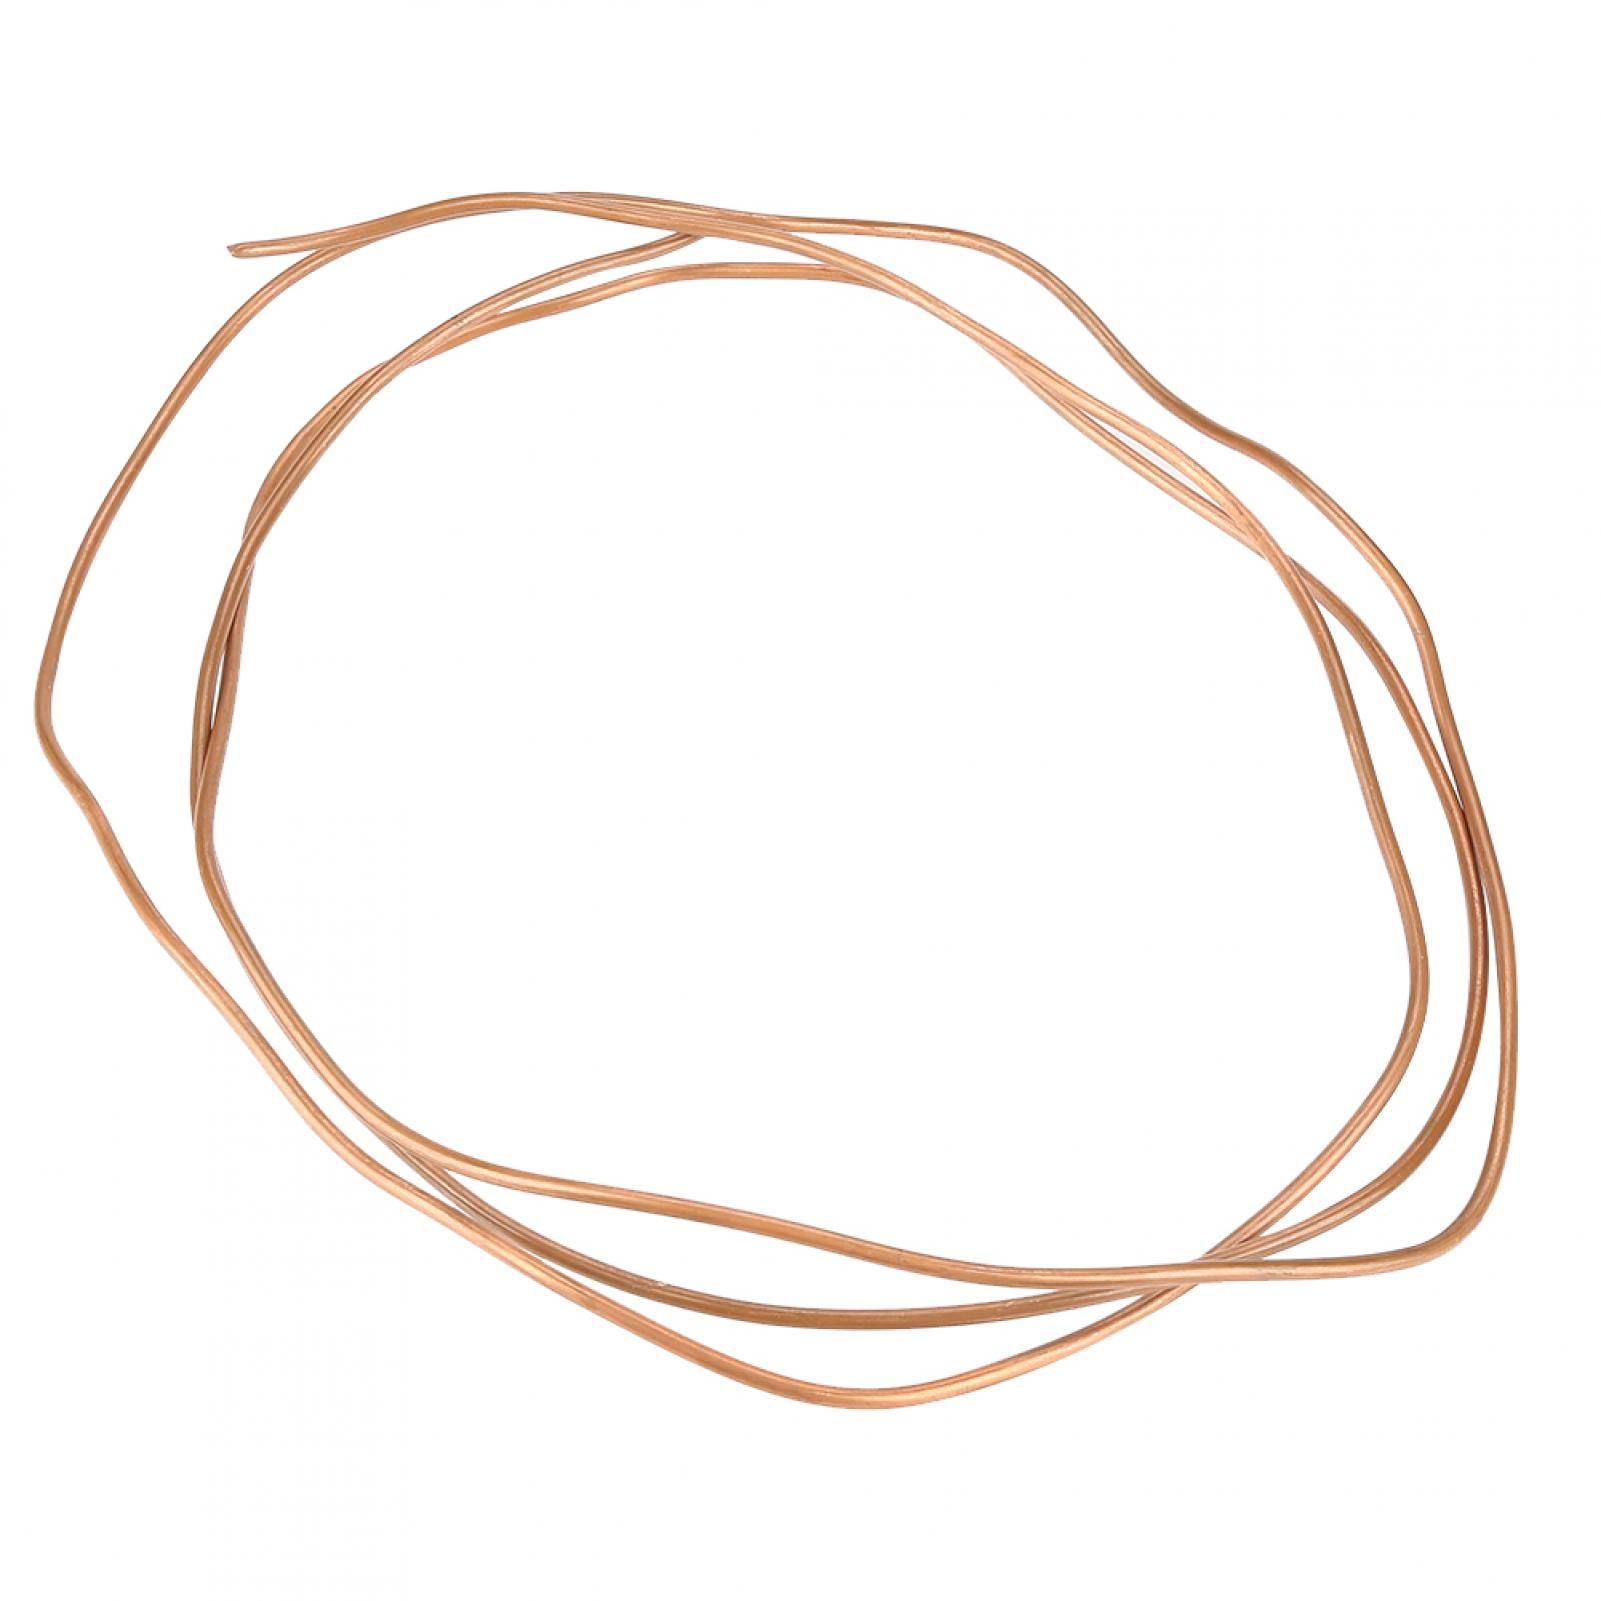 Copper tube copper tube soft copper outer diameter soft copper tube 2 mm x inner diameter 1 mm for cooling systems length 2M thickness 0.5 mm 